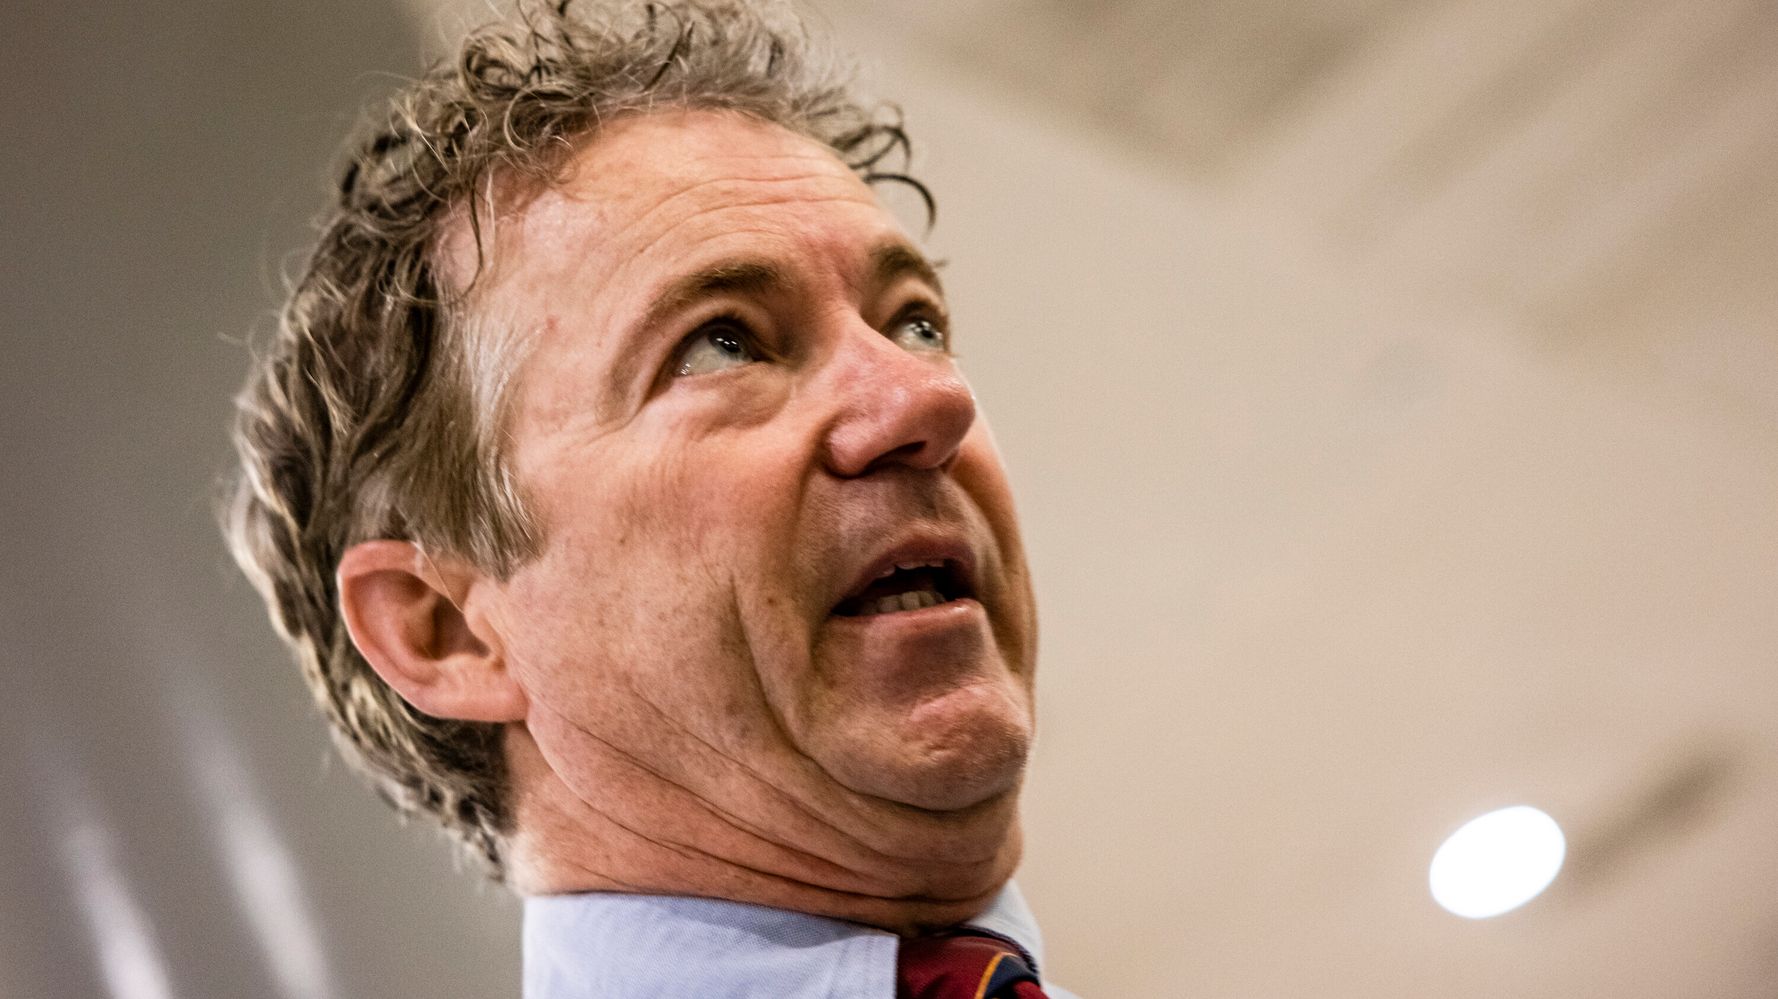 Sen. Rand Paul Told To 'Get F**ked' During Virtual Town Hall